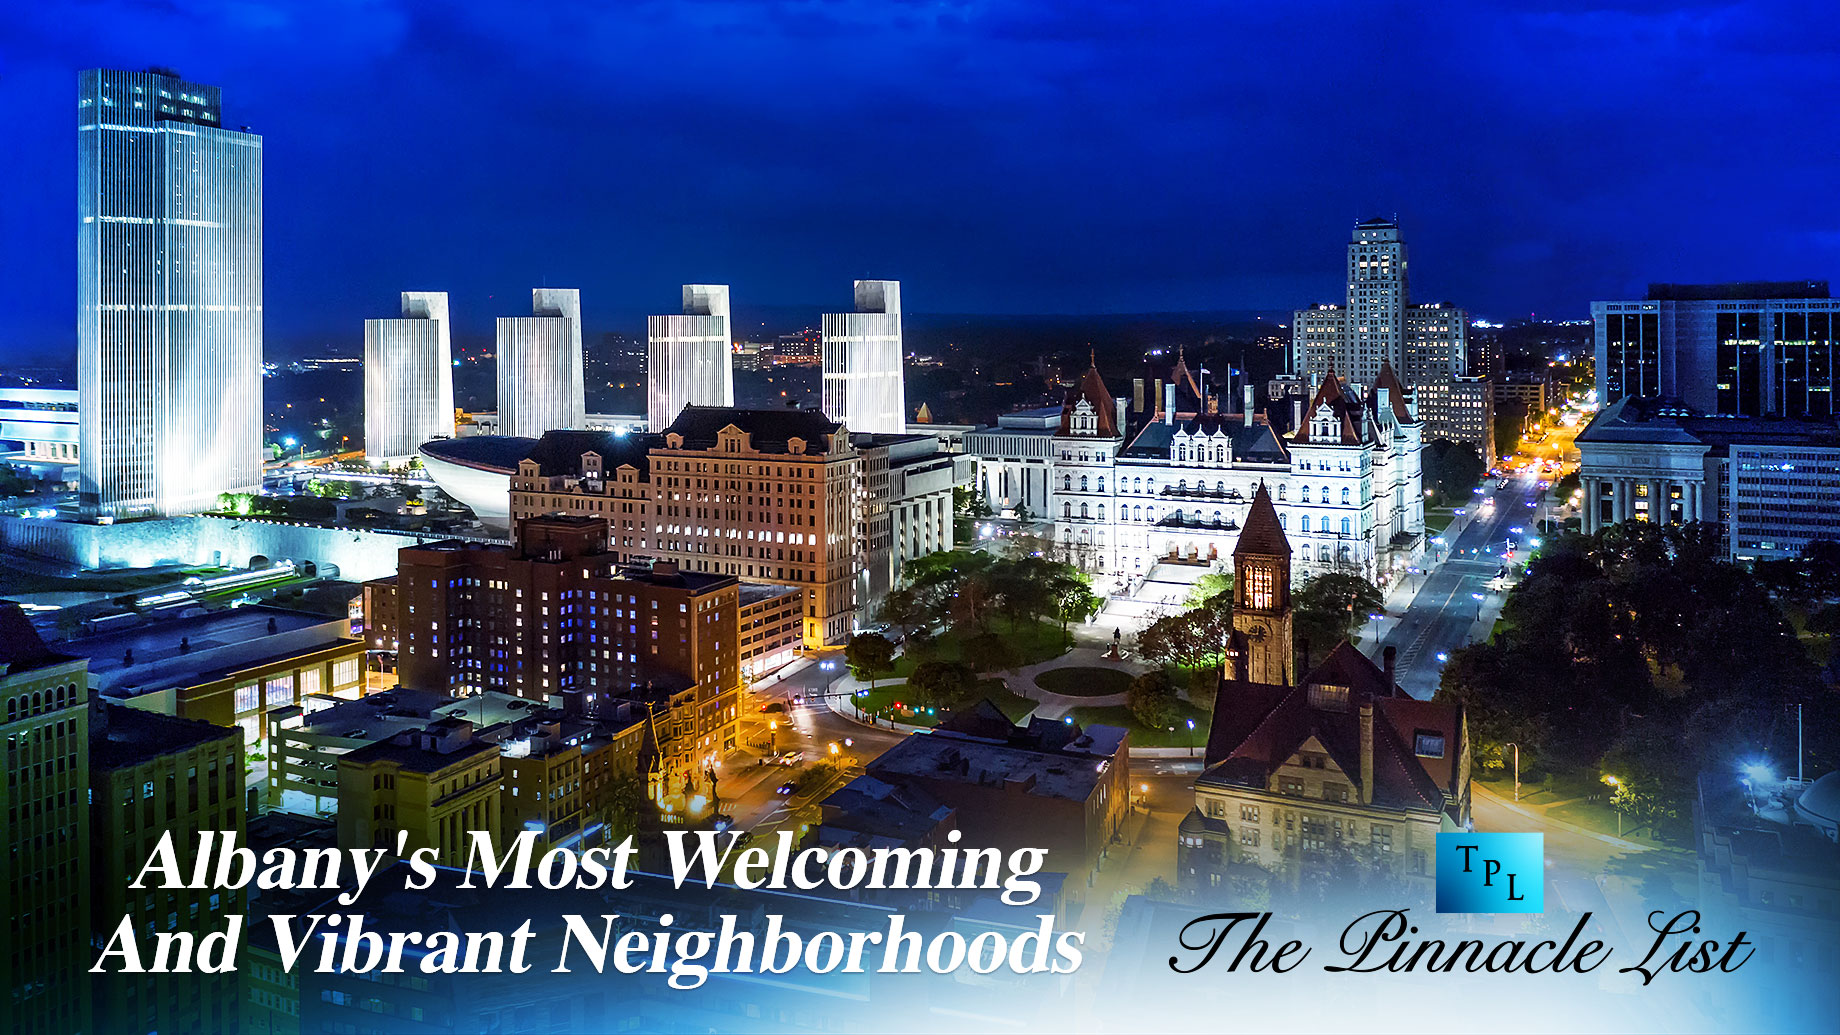 Albany's Most Welcoming And Vibrant Neighborhoods